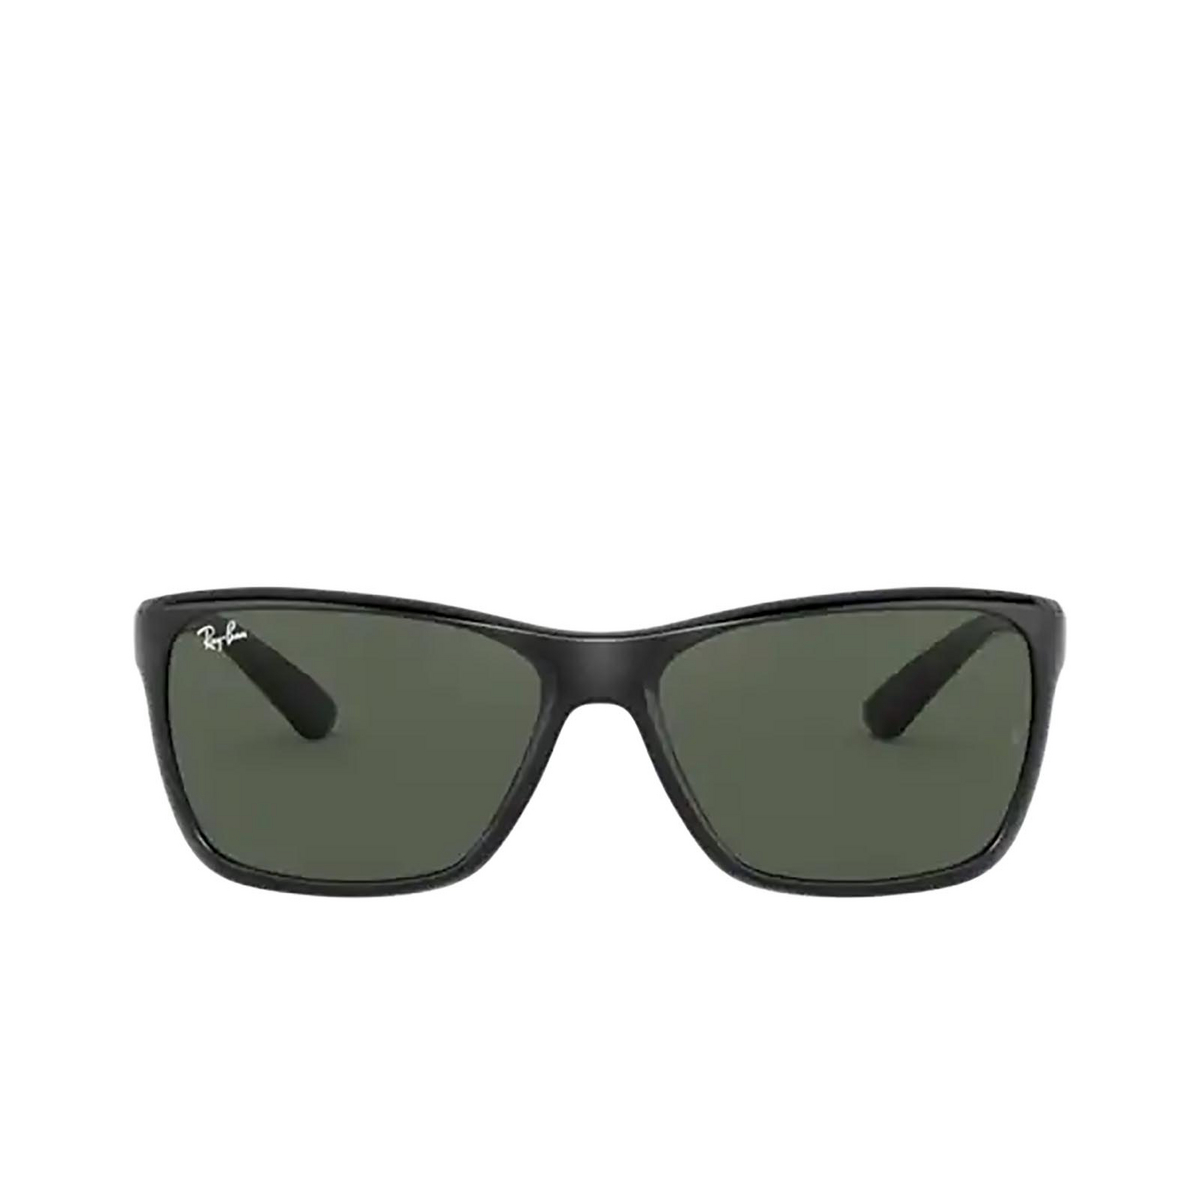 Ray-Ban RB4331 Sunglasses 601/71 BLACK - front view